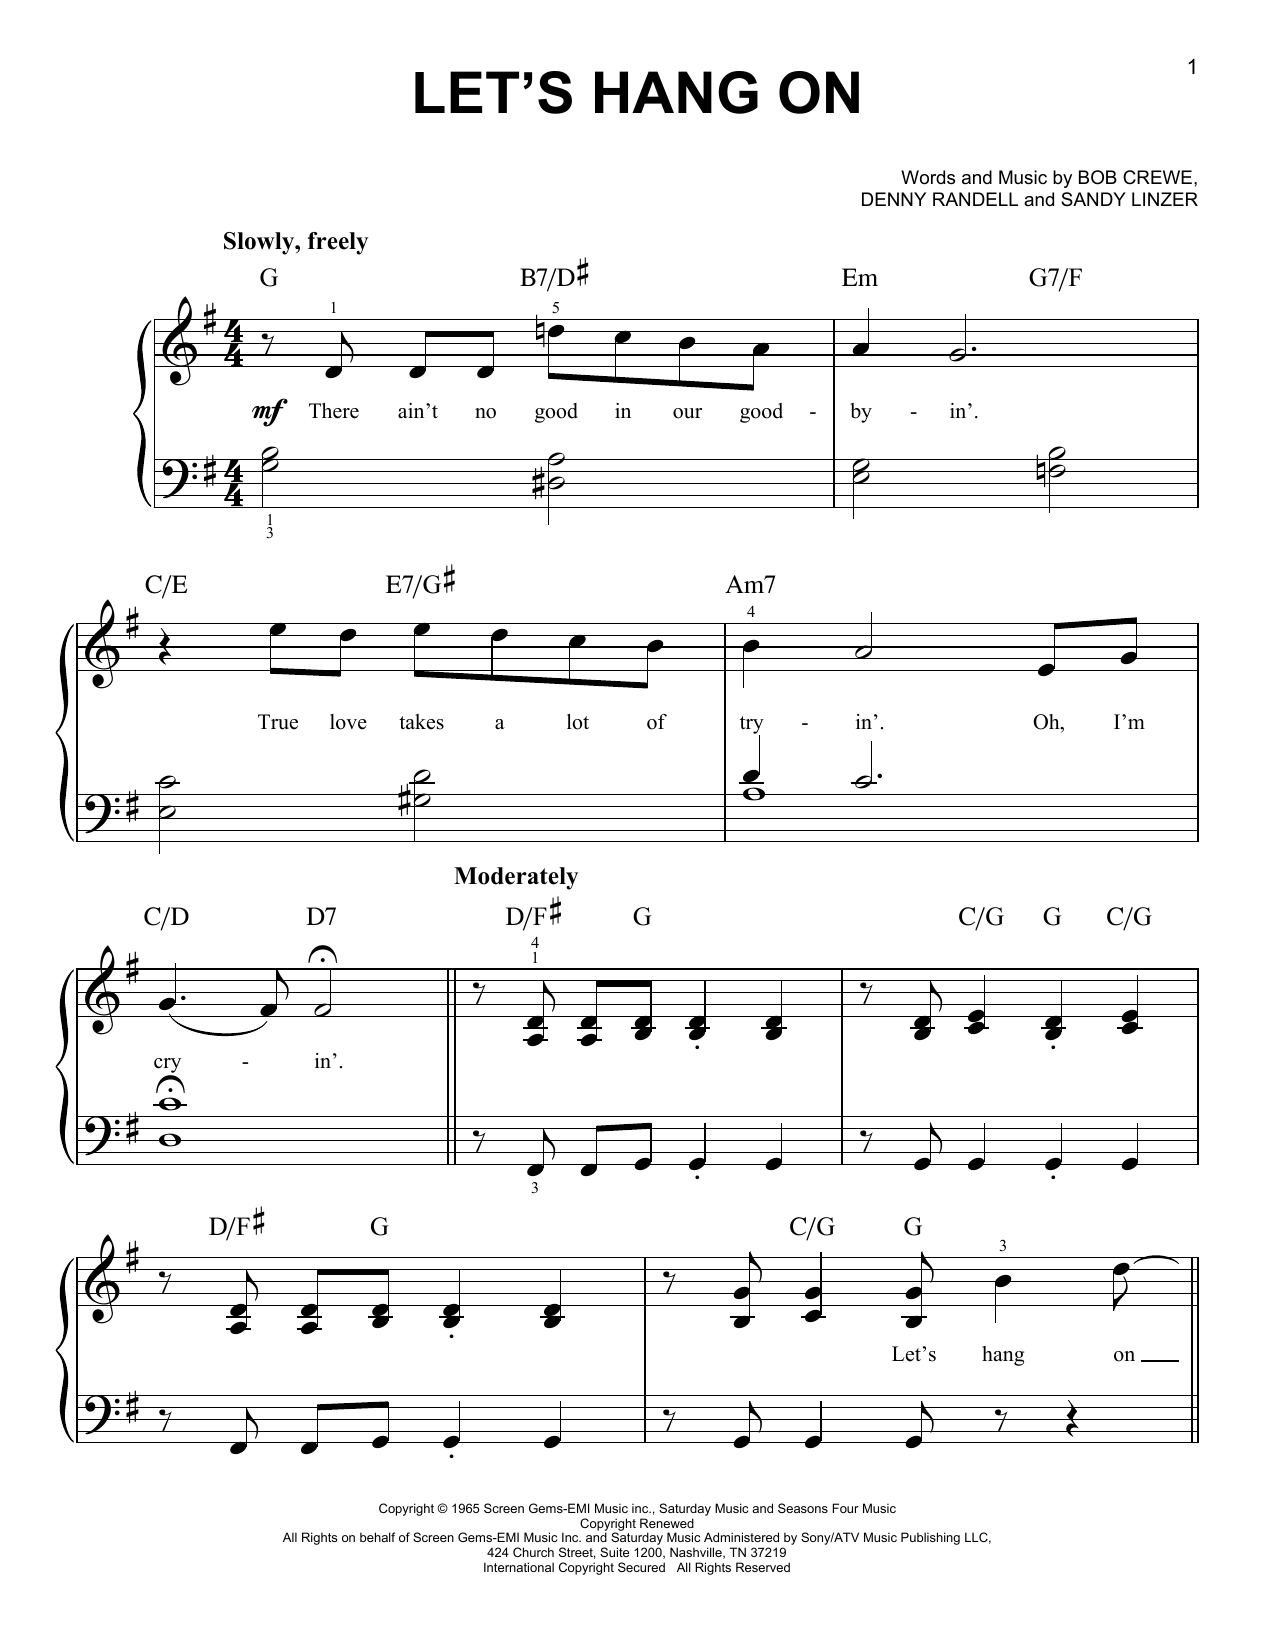 Download Frankie Valli & The Four Seasons Let's Hang On Sheet Music